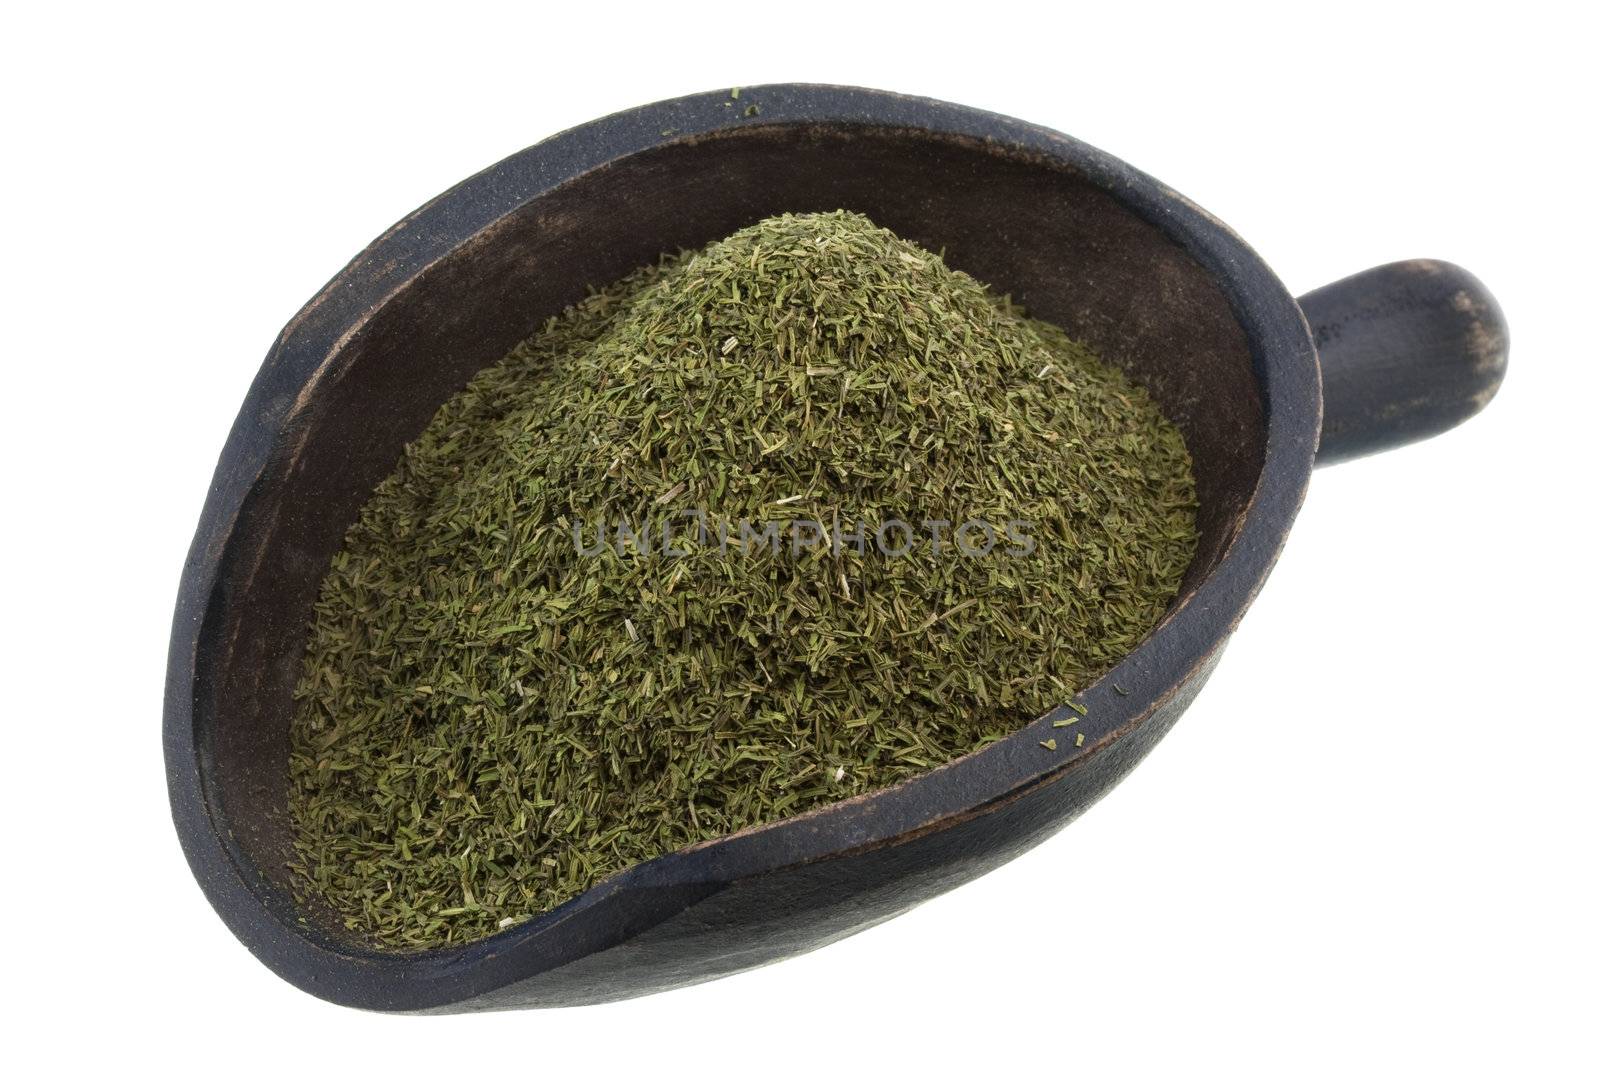 scoop of dried dill weed by PixelsAway